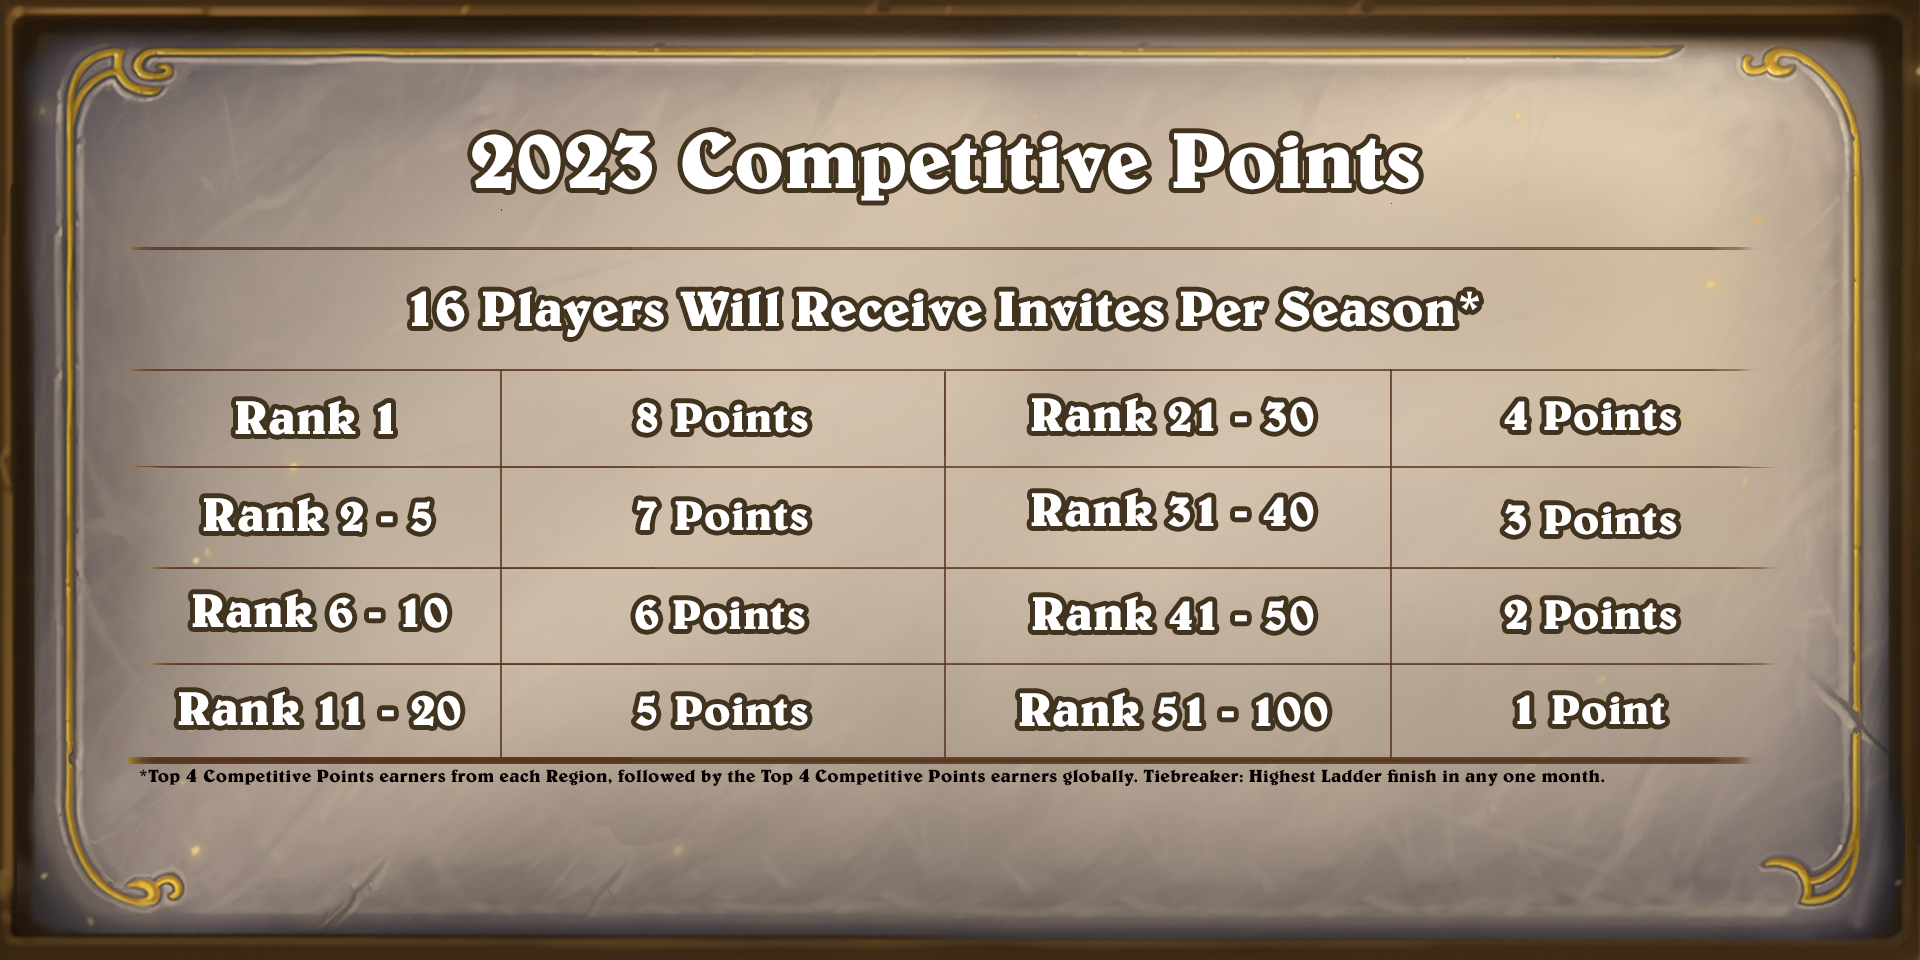 HS_CompetitivePoints_System_1920x1080_shorter version.png